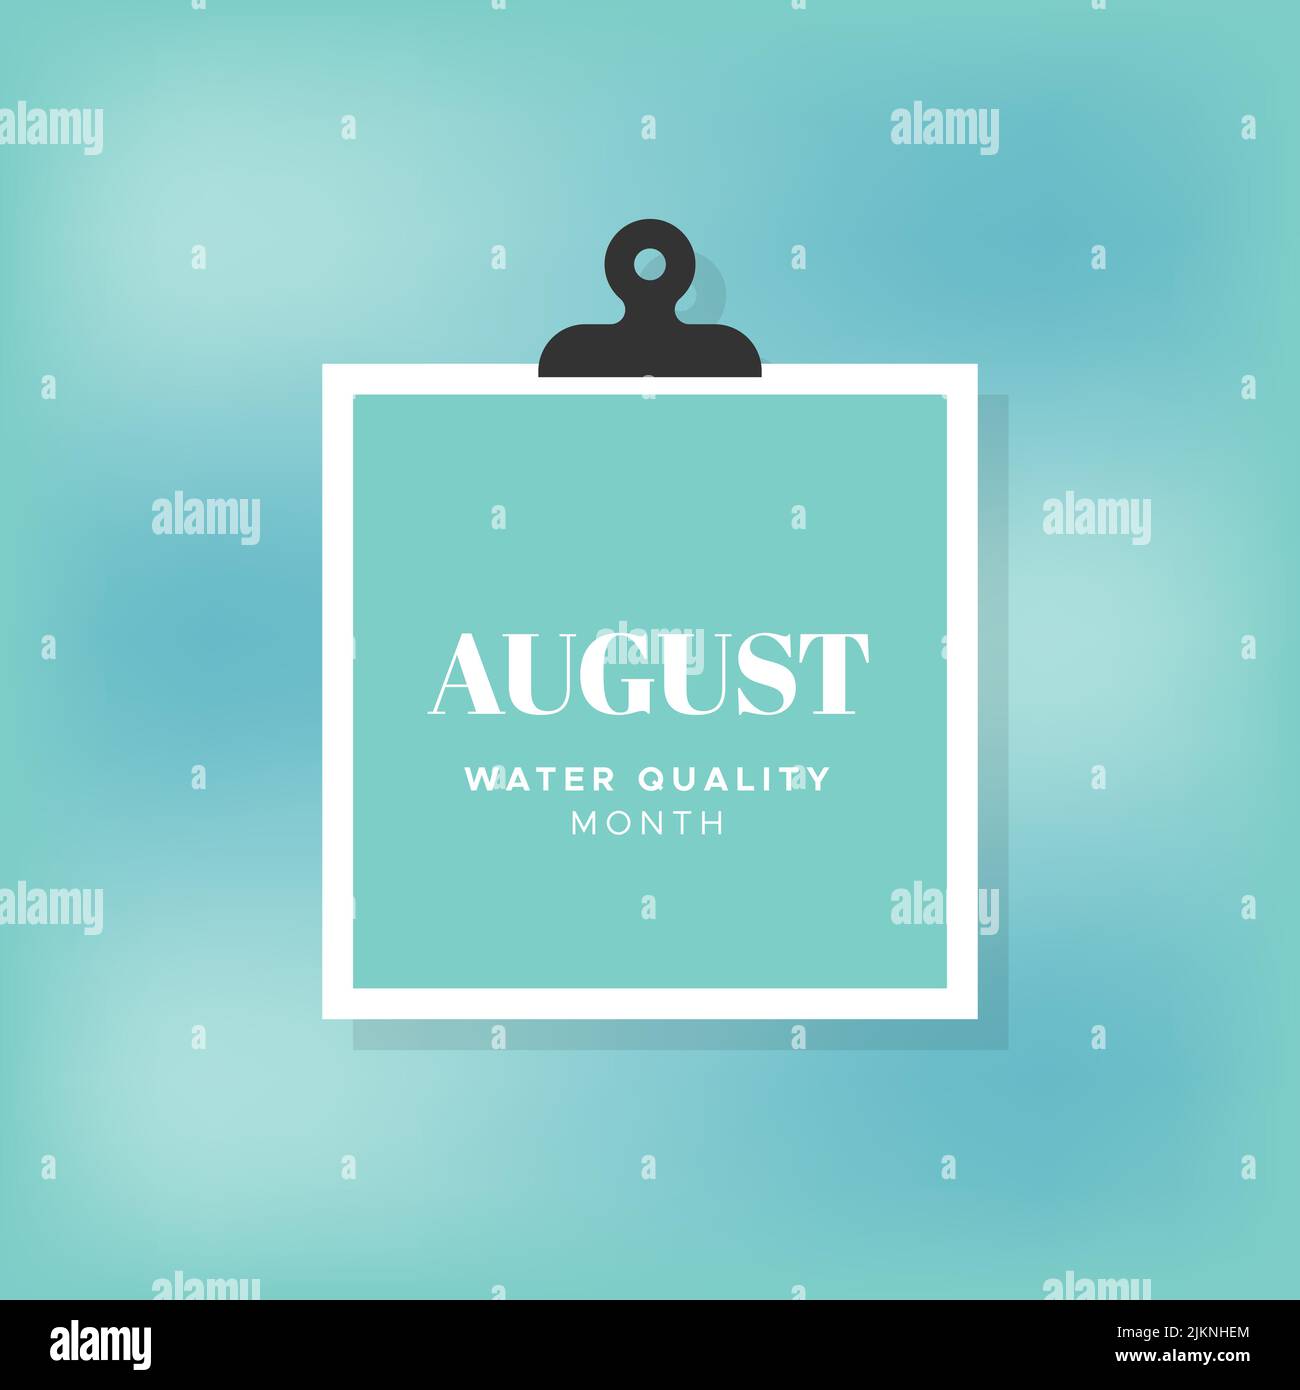 Water quality month. August. Grey blurred background. Vector illustration, flat design Stock Vector